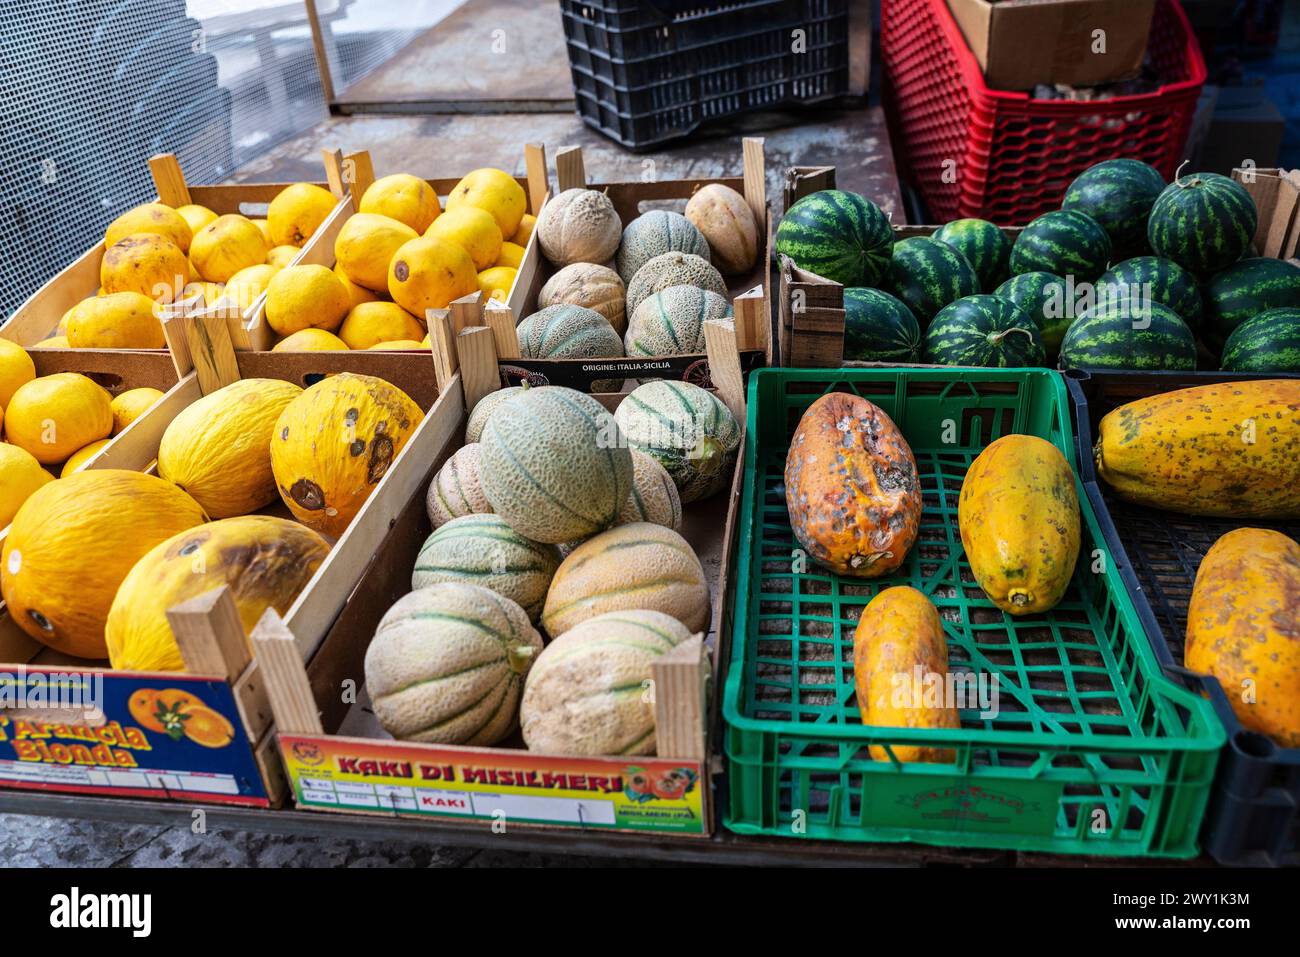 Palermo, Italy - May 13, 2023: Melons and watermelons in a fruit and vegetable shop in Ballaro Market, street food market in Palermo, Sicily, Italy Stock Photo